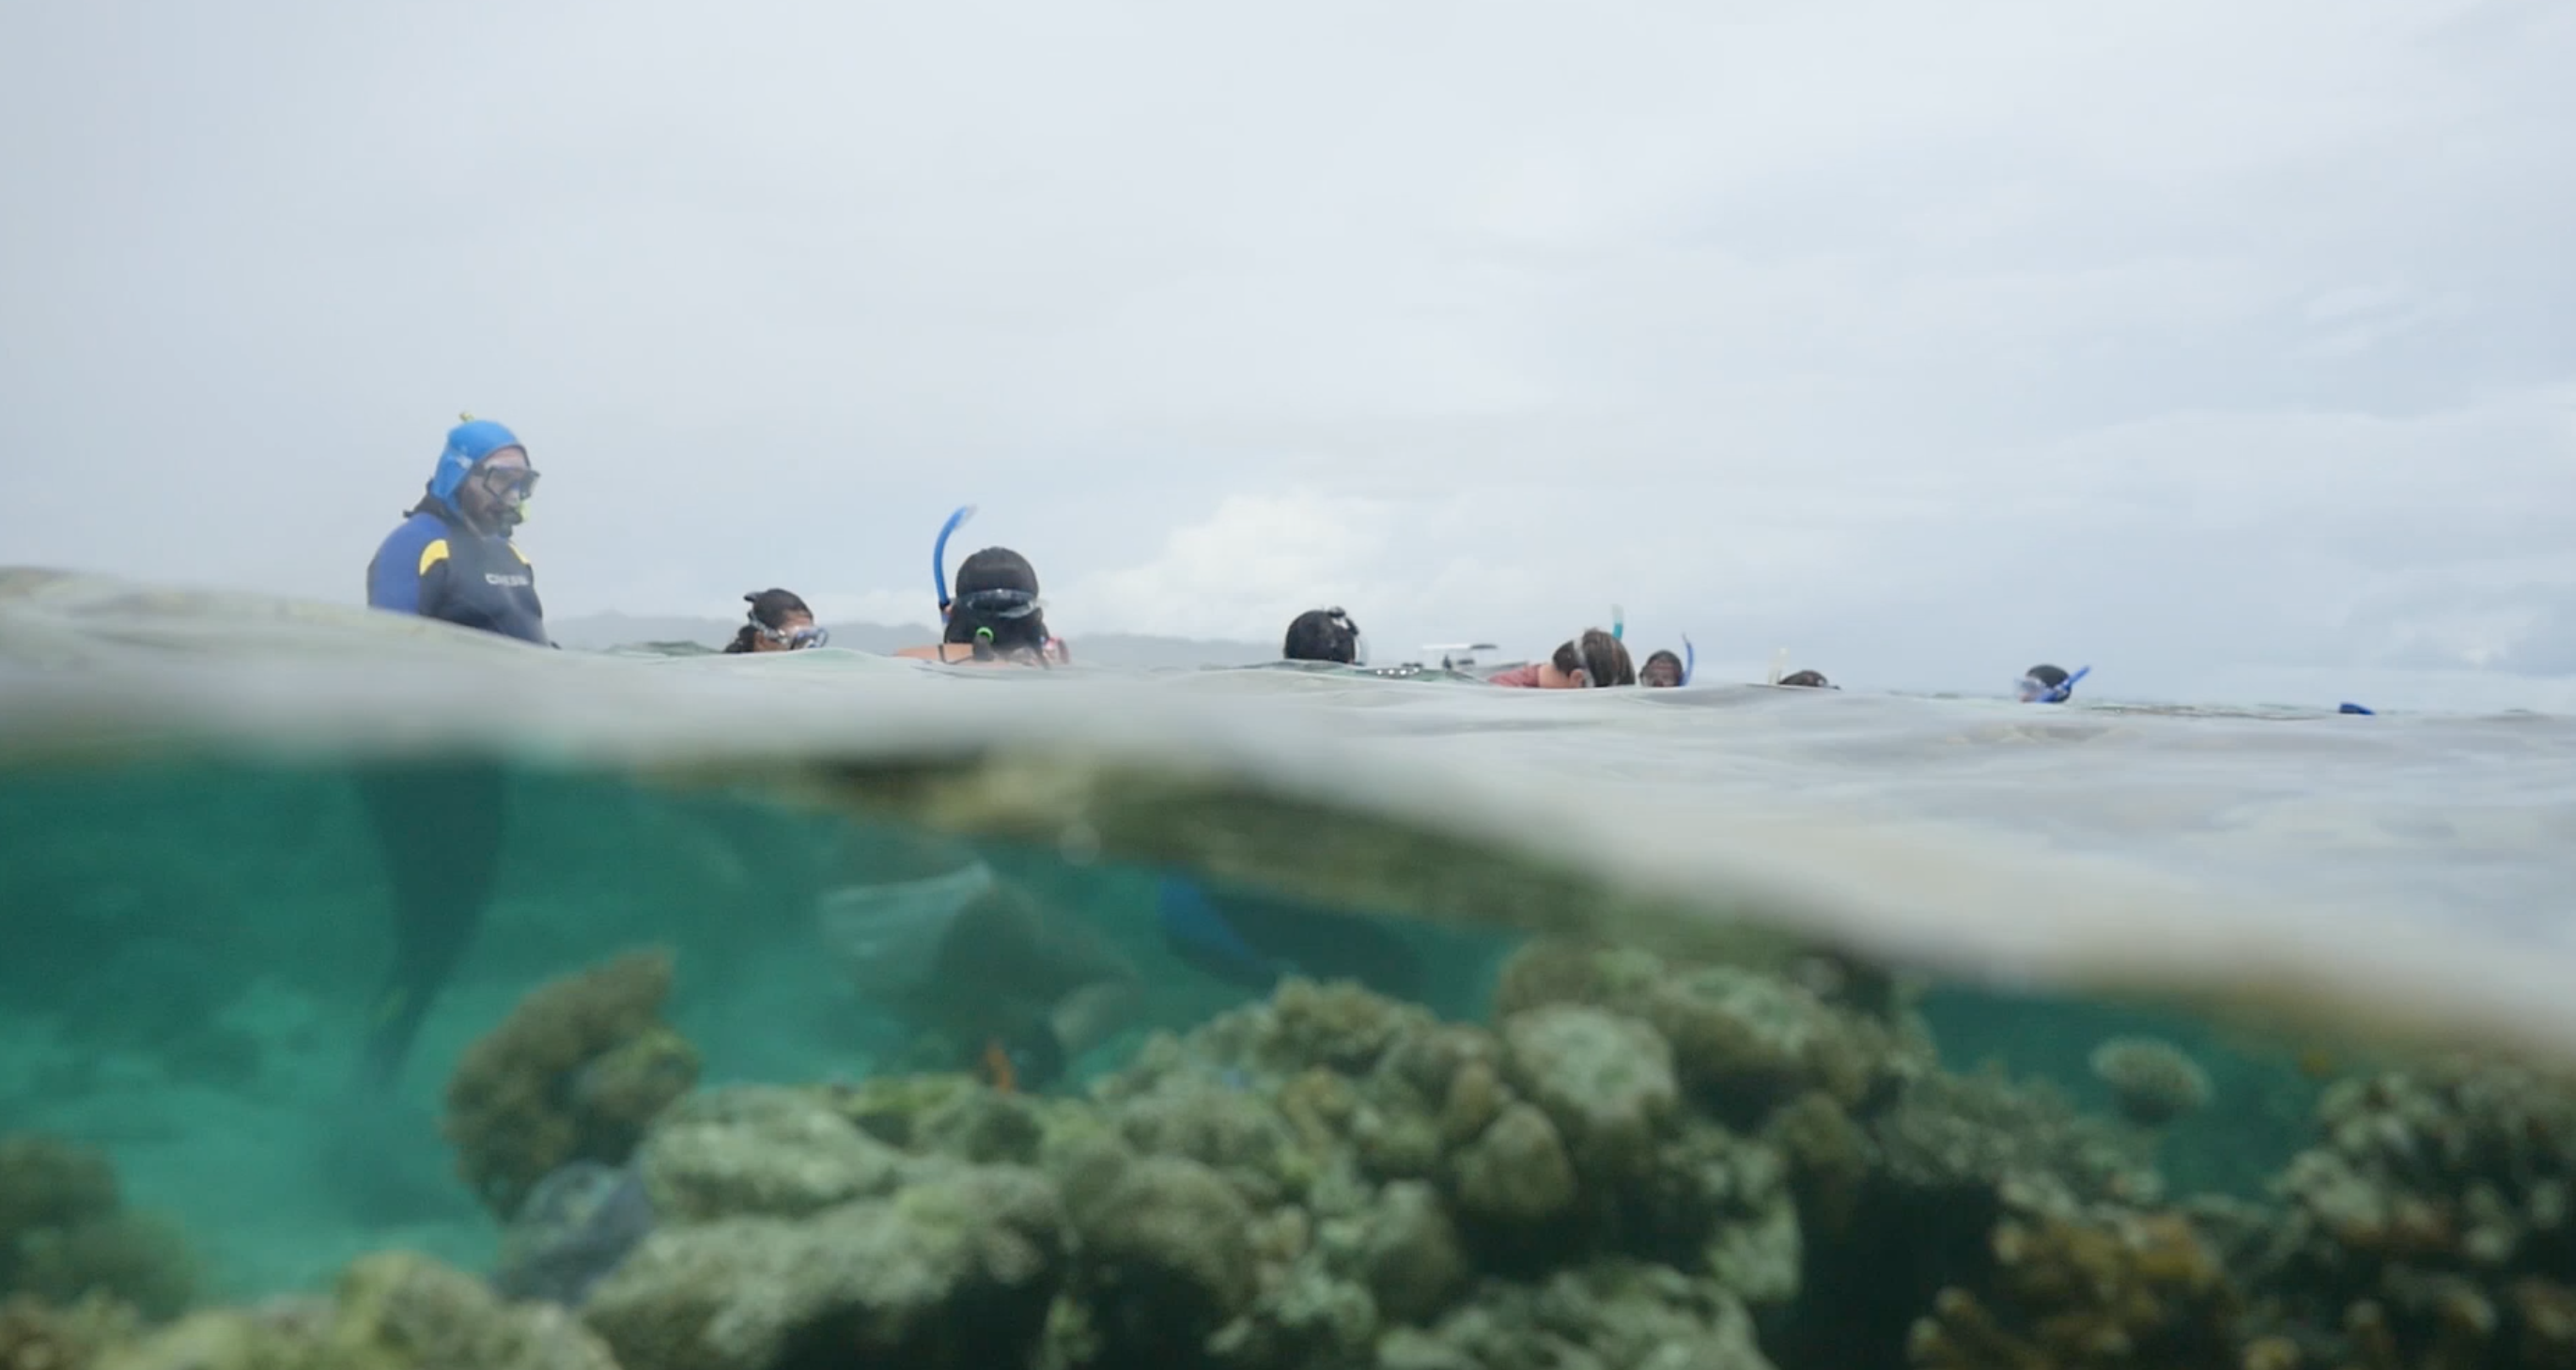 Dr. Robert Richmond (NSF ATE Grant Project's PI) Teaches A Group Of Snorkelers About The Coral Reef While Standing In The Water Surrounded By Students And Coral Reef.